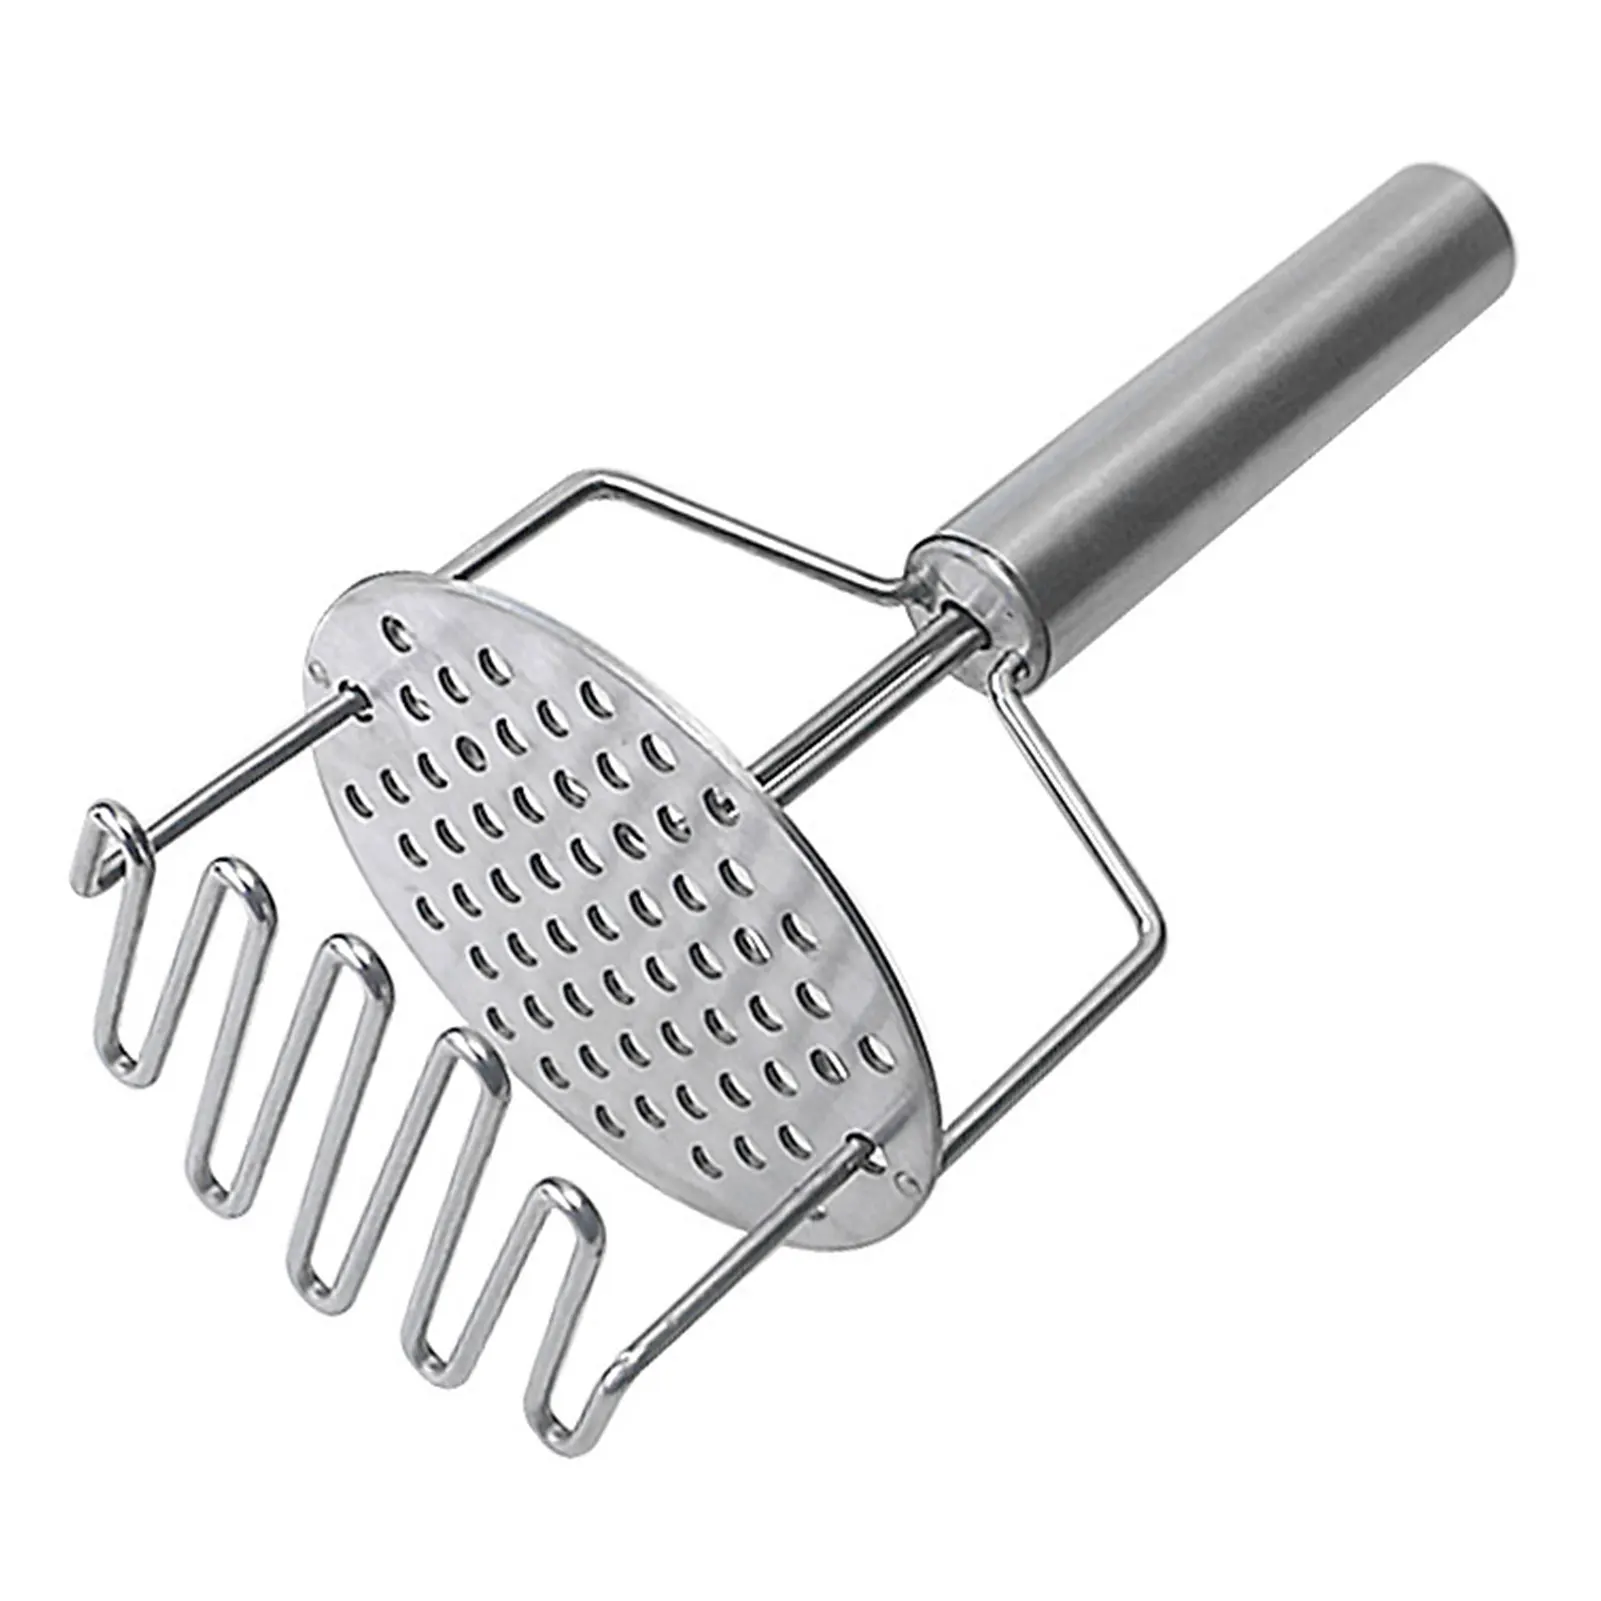 

2 In 1 Potato Mashers Stainless Steel Heavy Duty Mashed Potatoes Masher Bean Smasher Tool Professional Metal Wire Masher Kitchen